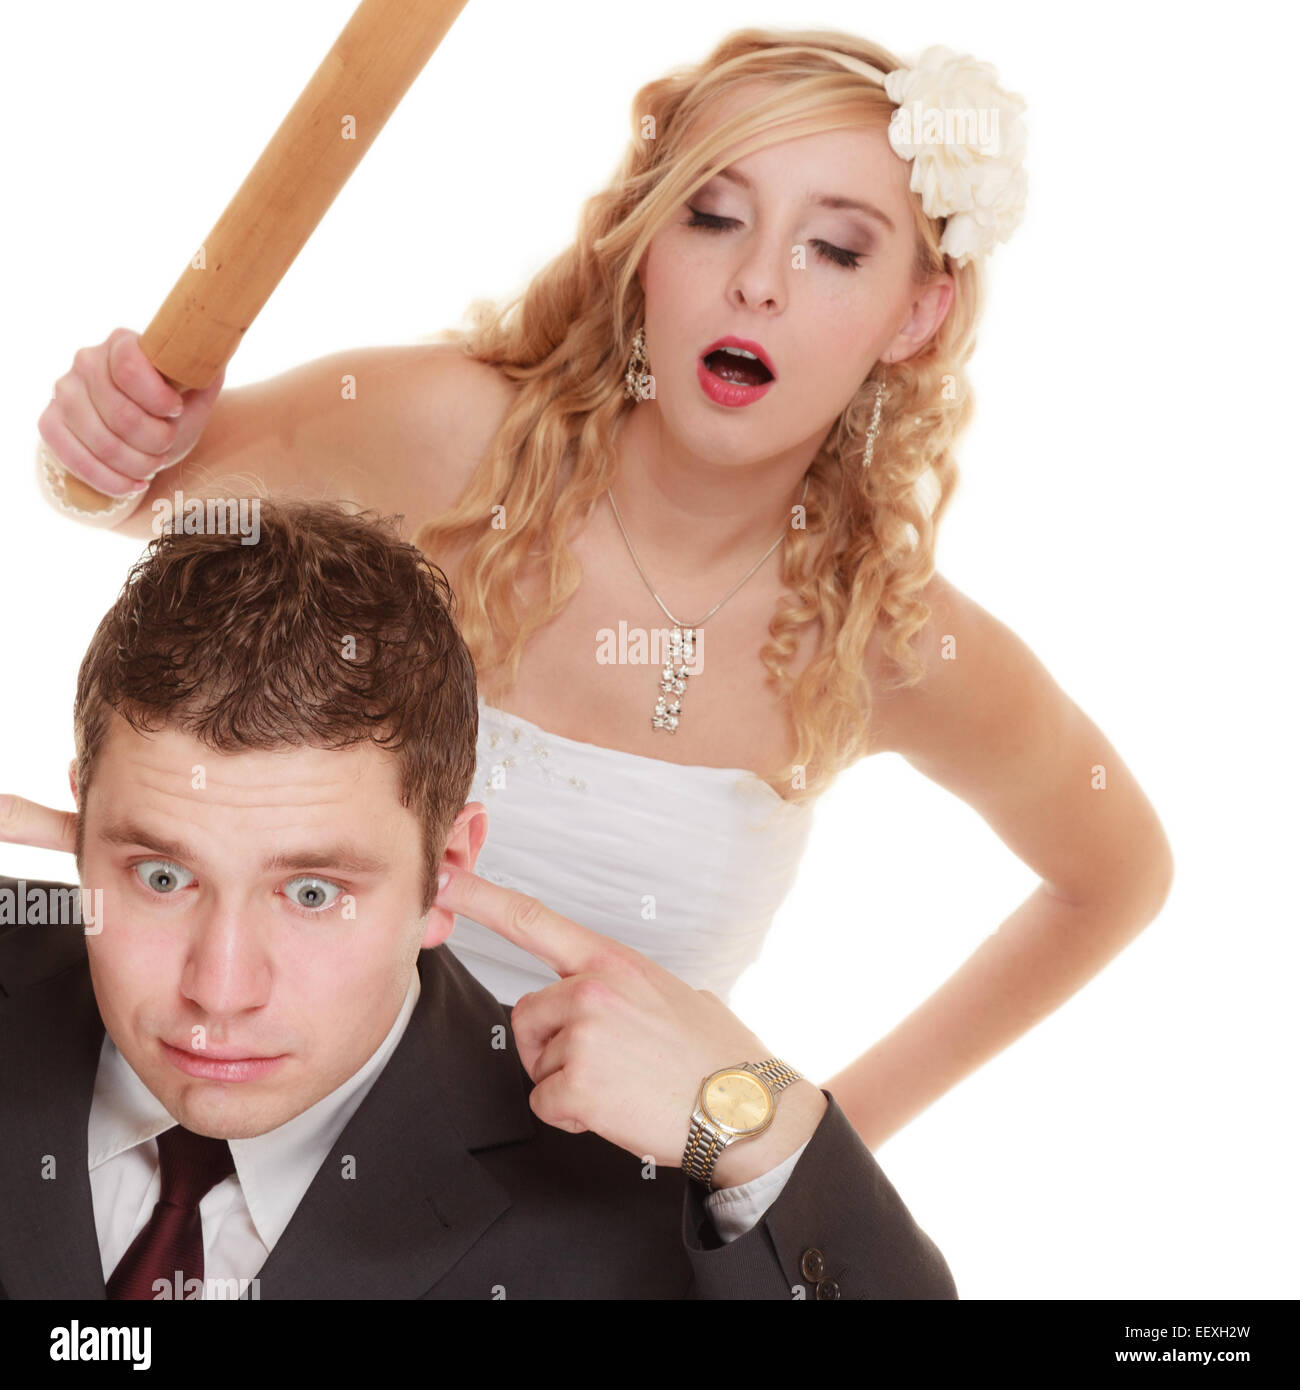 Wedding couple having argument - conflict, bad relationships. Angry woman fury bride holds rolling pin in fight with groom. Isol Stock Photo